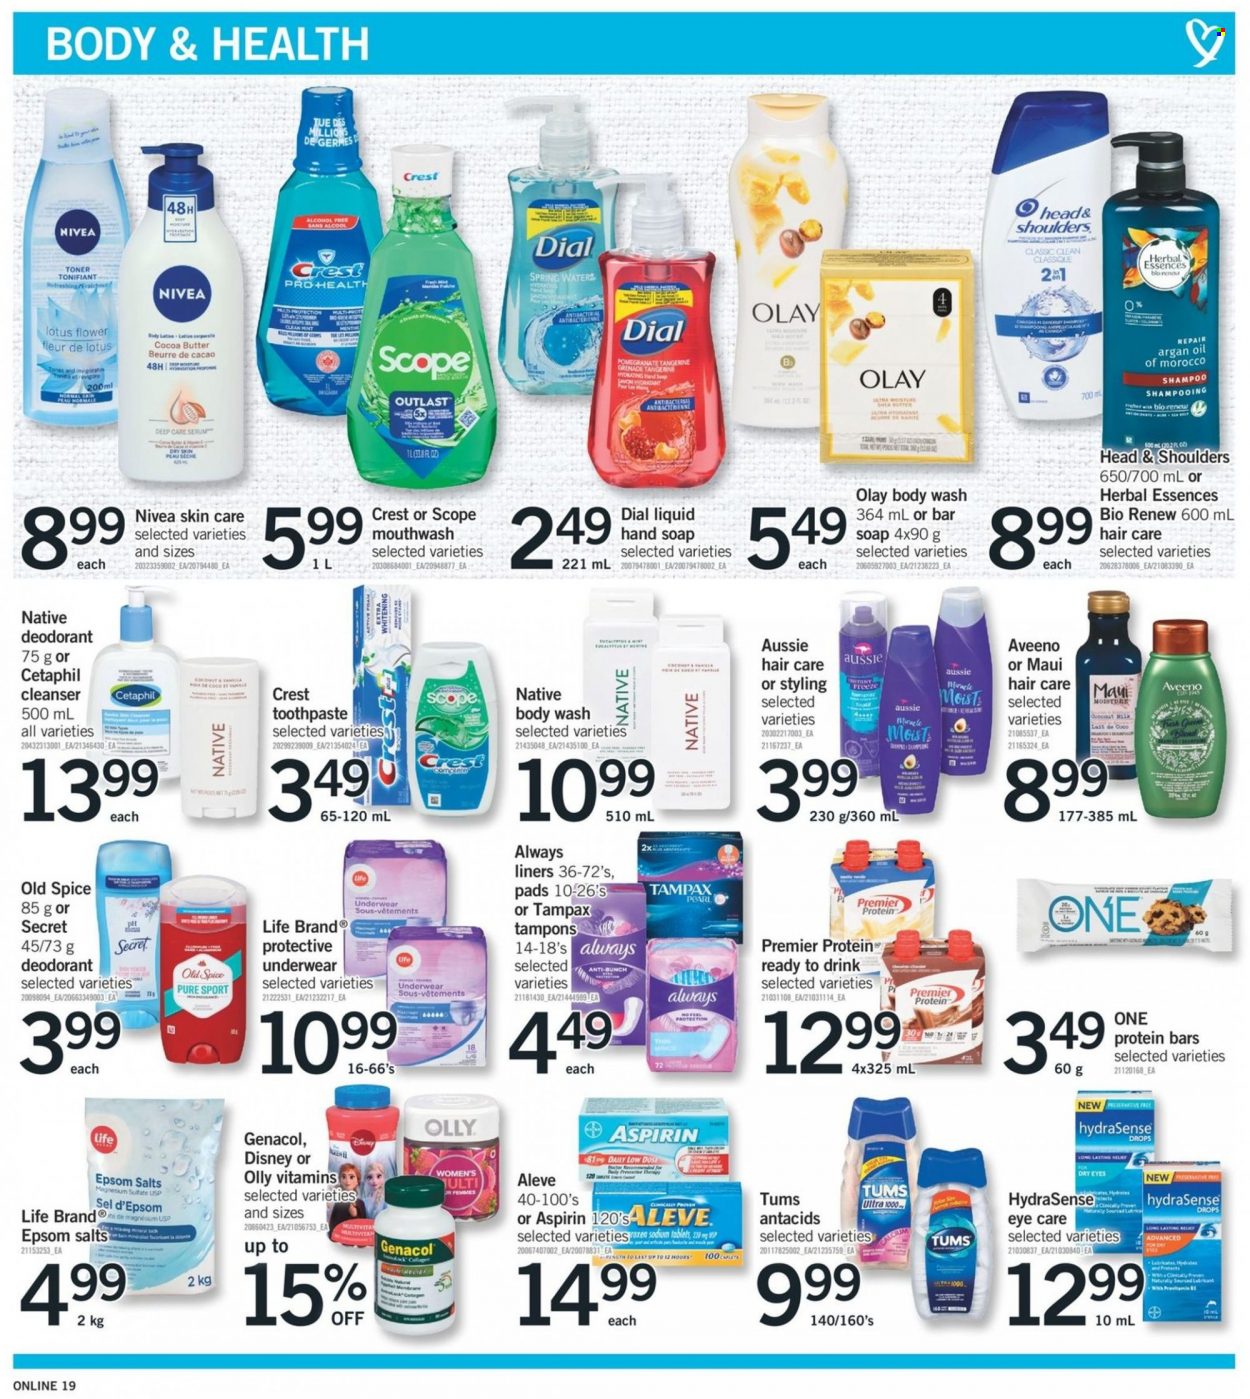 thumbnail - Fortinos Flyer - February 09, 2023 - February 15, 2023 - Sales products - Disney, milk, protein bar, spice, spring water, Aveeno, Nivea, Always liners, body wash, hand soap, soap bar, Dial, soap, toothpaste, mouthwash, Crest, tampons, cleanser, serum, toner, Olay, Aussie, Head & Shoulders, Herbal Essences, Maui Moisture, body lotion, shea butter, anti-perspirant, Lotus, tent, scope, Aleve, magnesium, argan oil, Low Dose, aspirin, shampoo, Tampax, Old Spice, deodorant. Page 18.